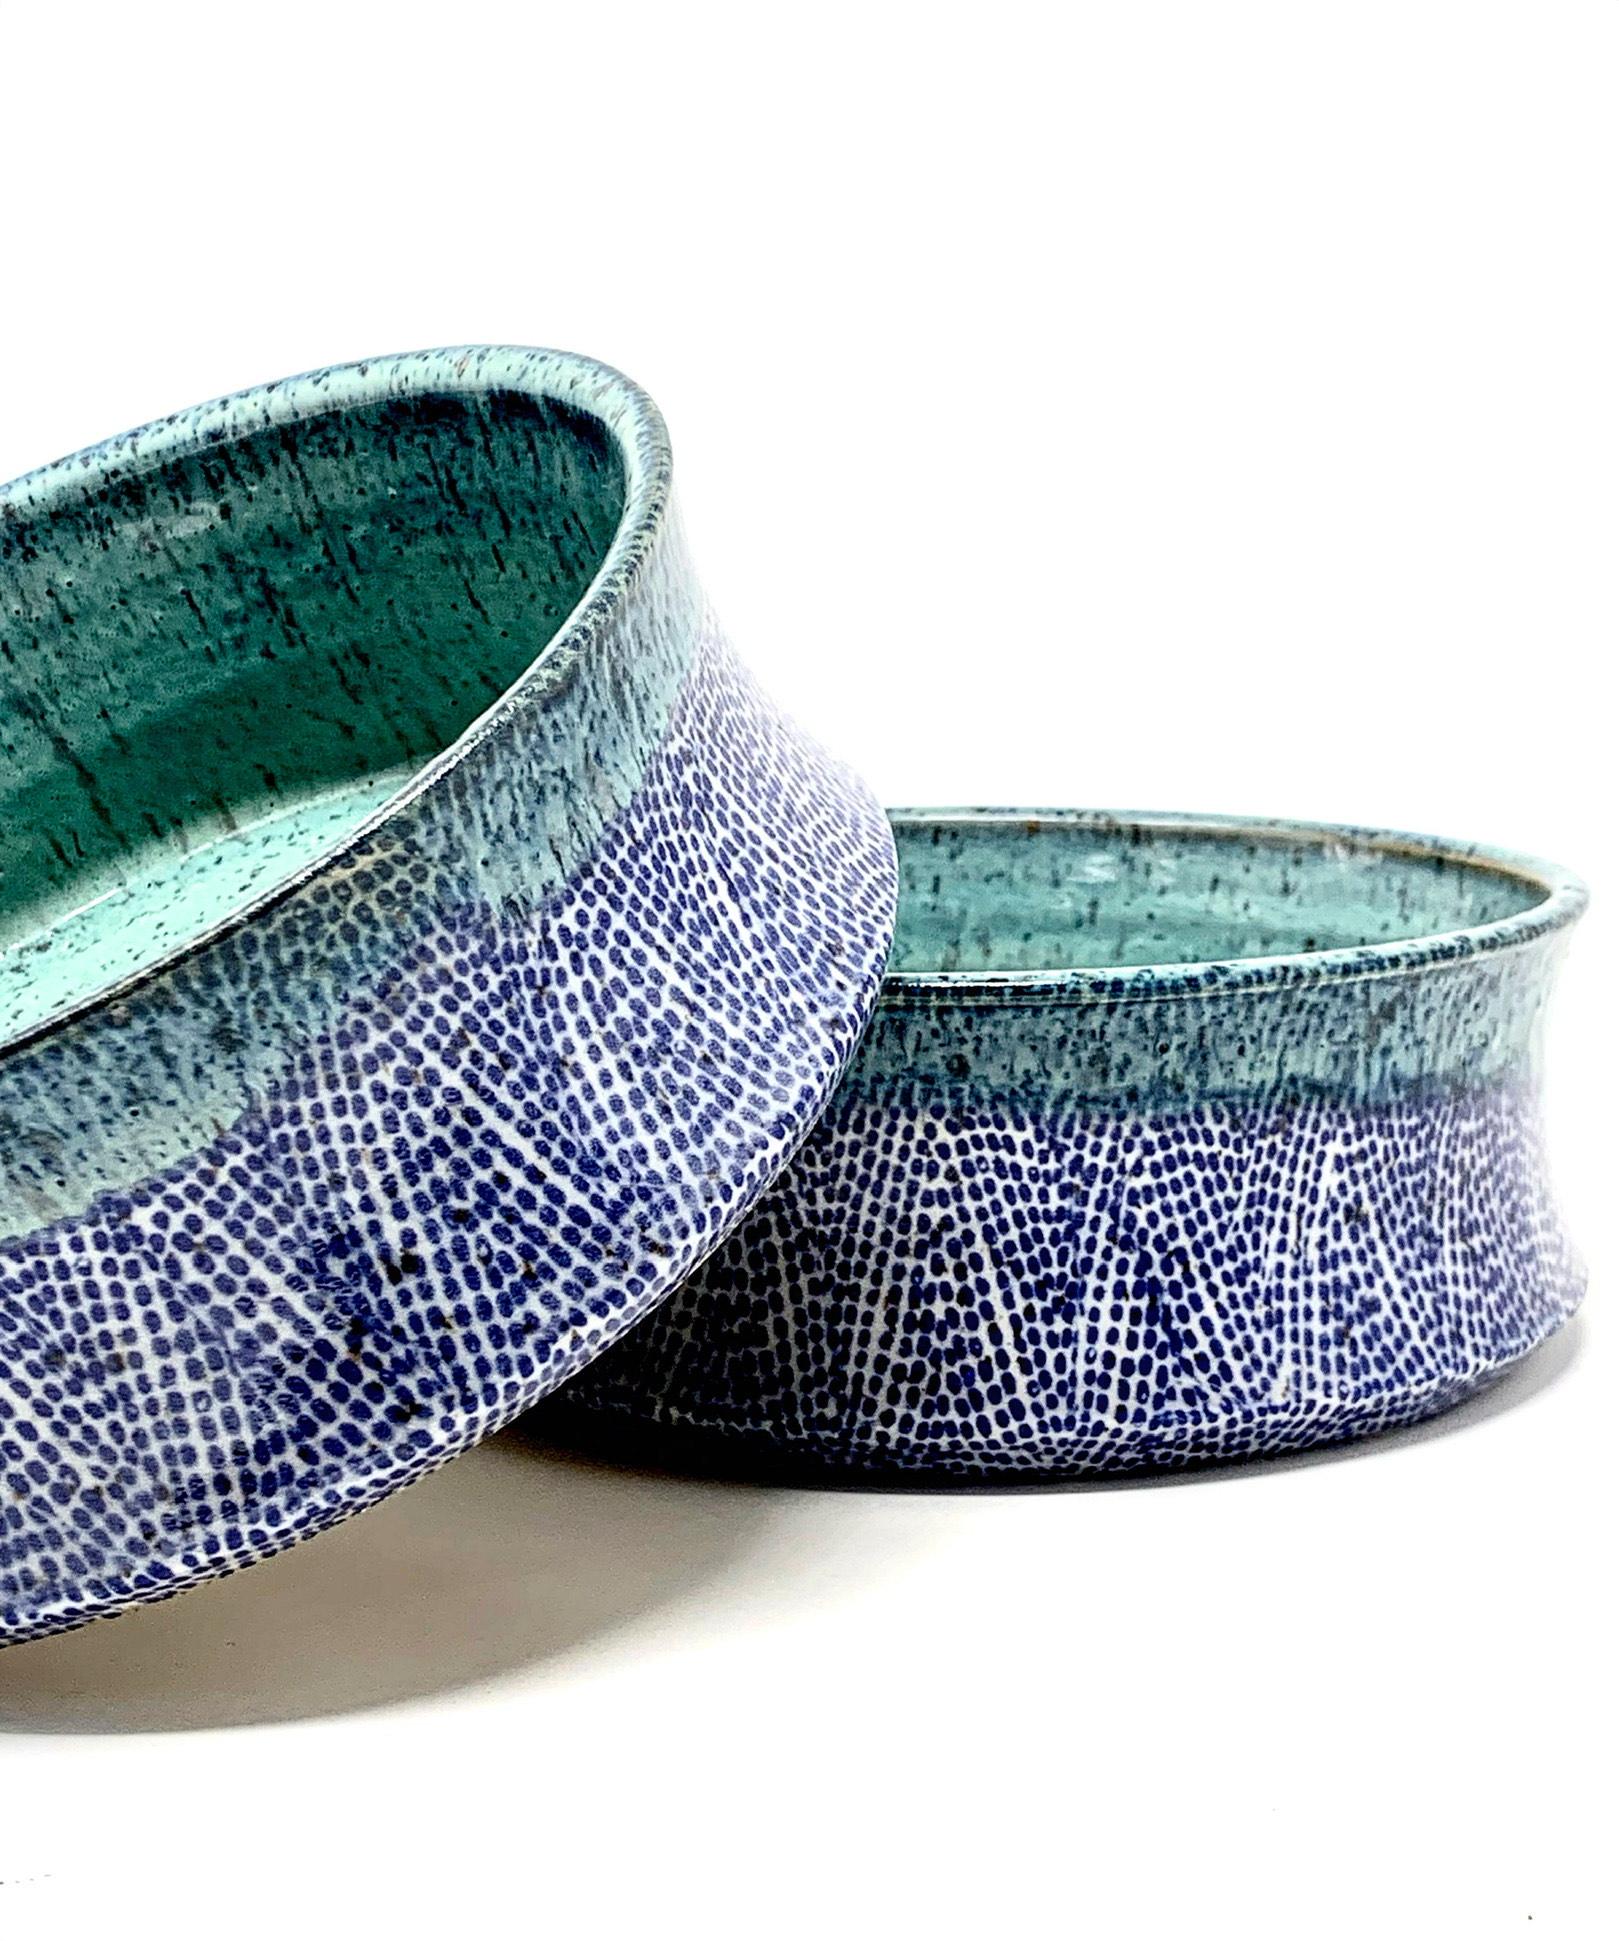 These handcrafted bowls feature a detailed speckled pattern, resembling a network of delicate coral or a close-up of a butterfly's wing. The exterior of each bowl presents a striking contrast with a serene teal glaze, suggesting a harmony between the vibrant life of coral reefs and the calm of the ocean's surface.